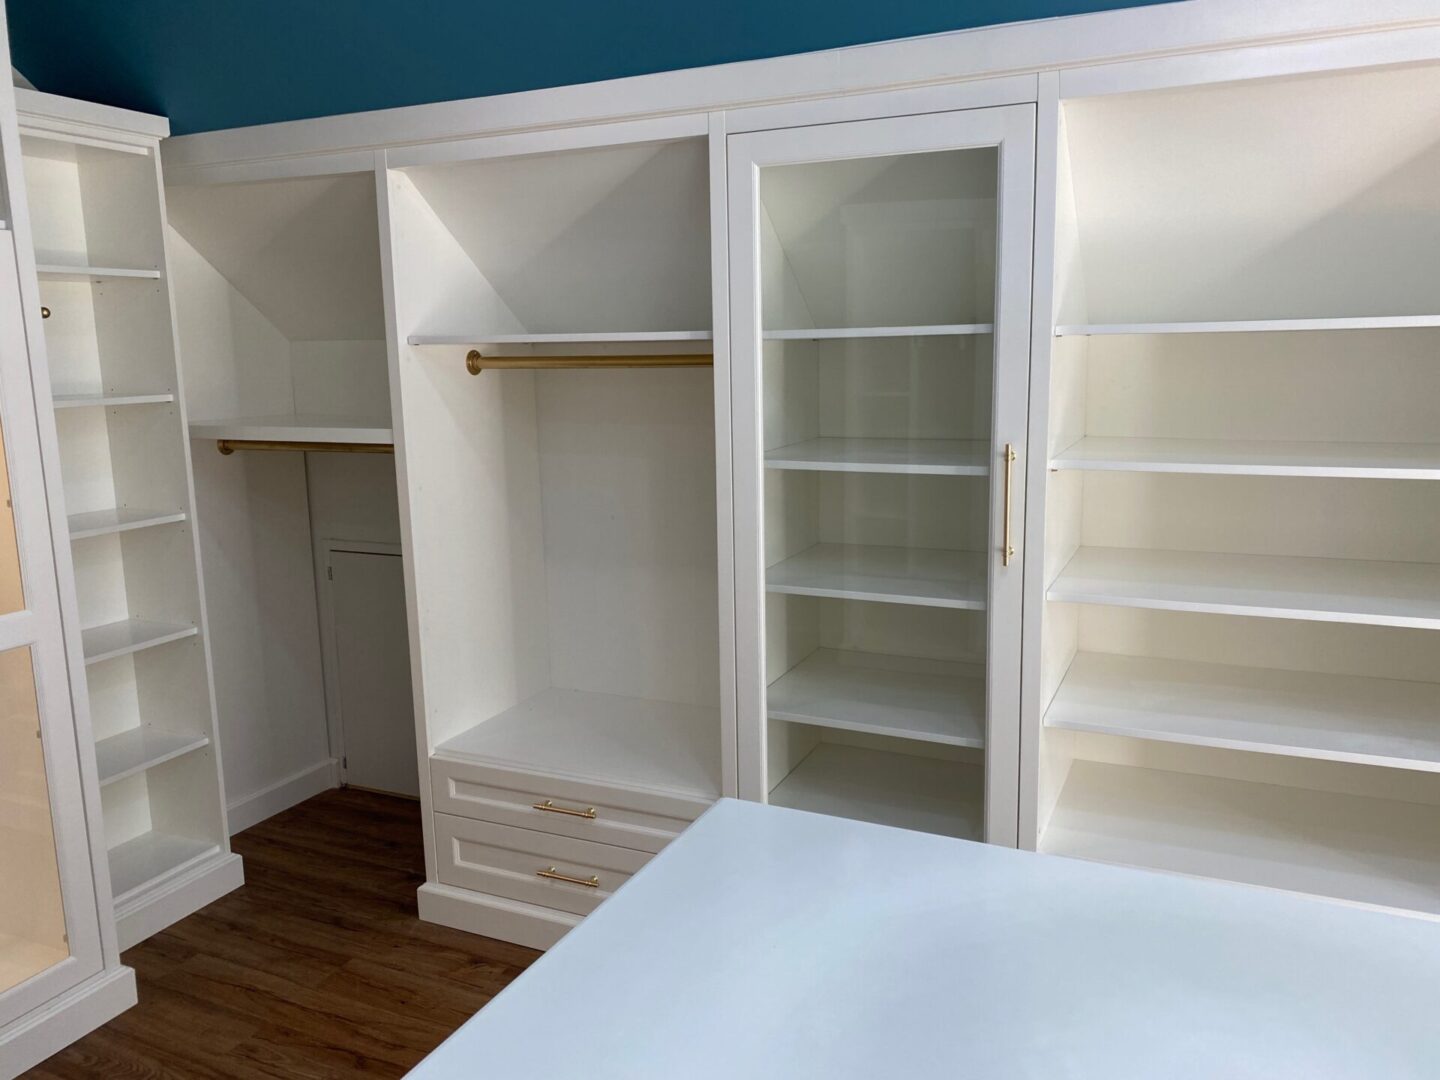 An Empty Closet Space With White Shelves